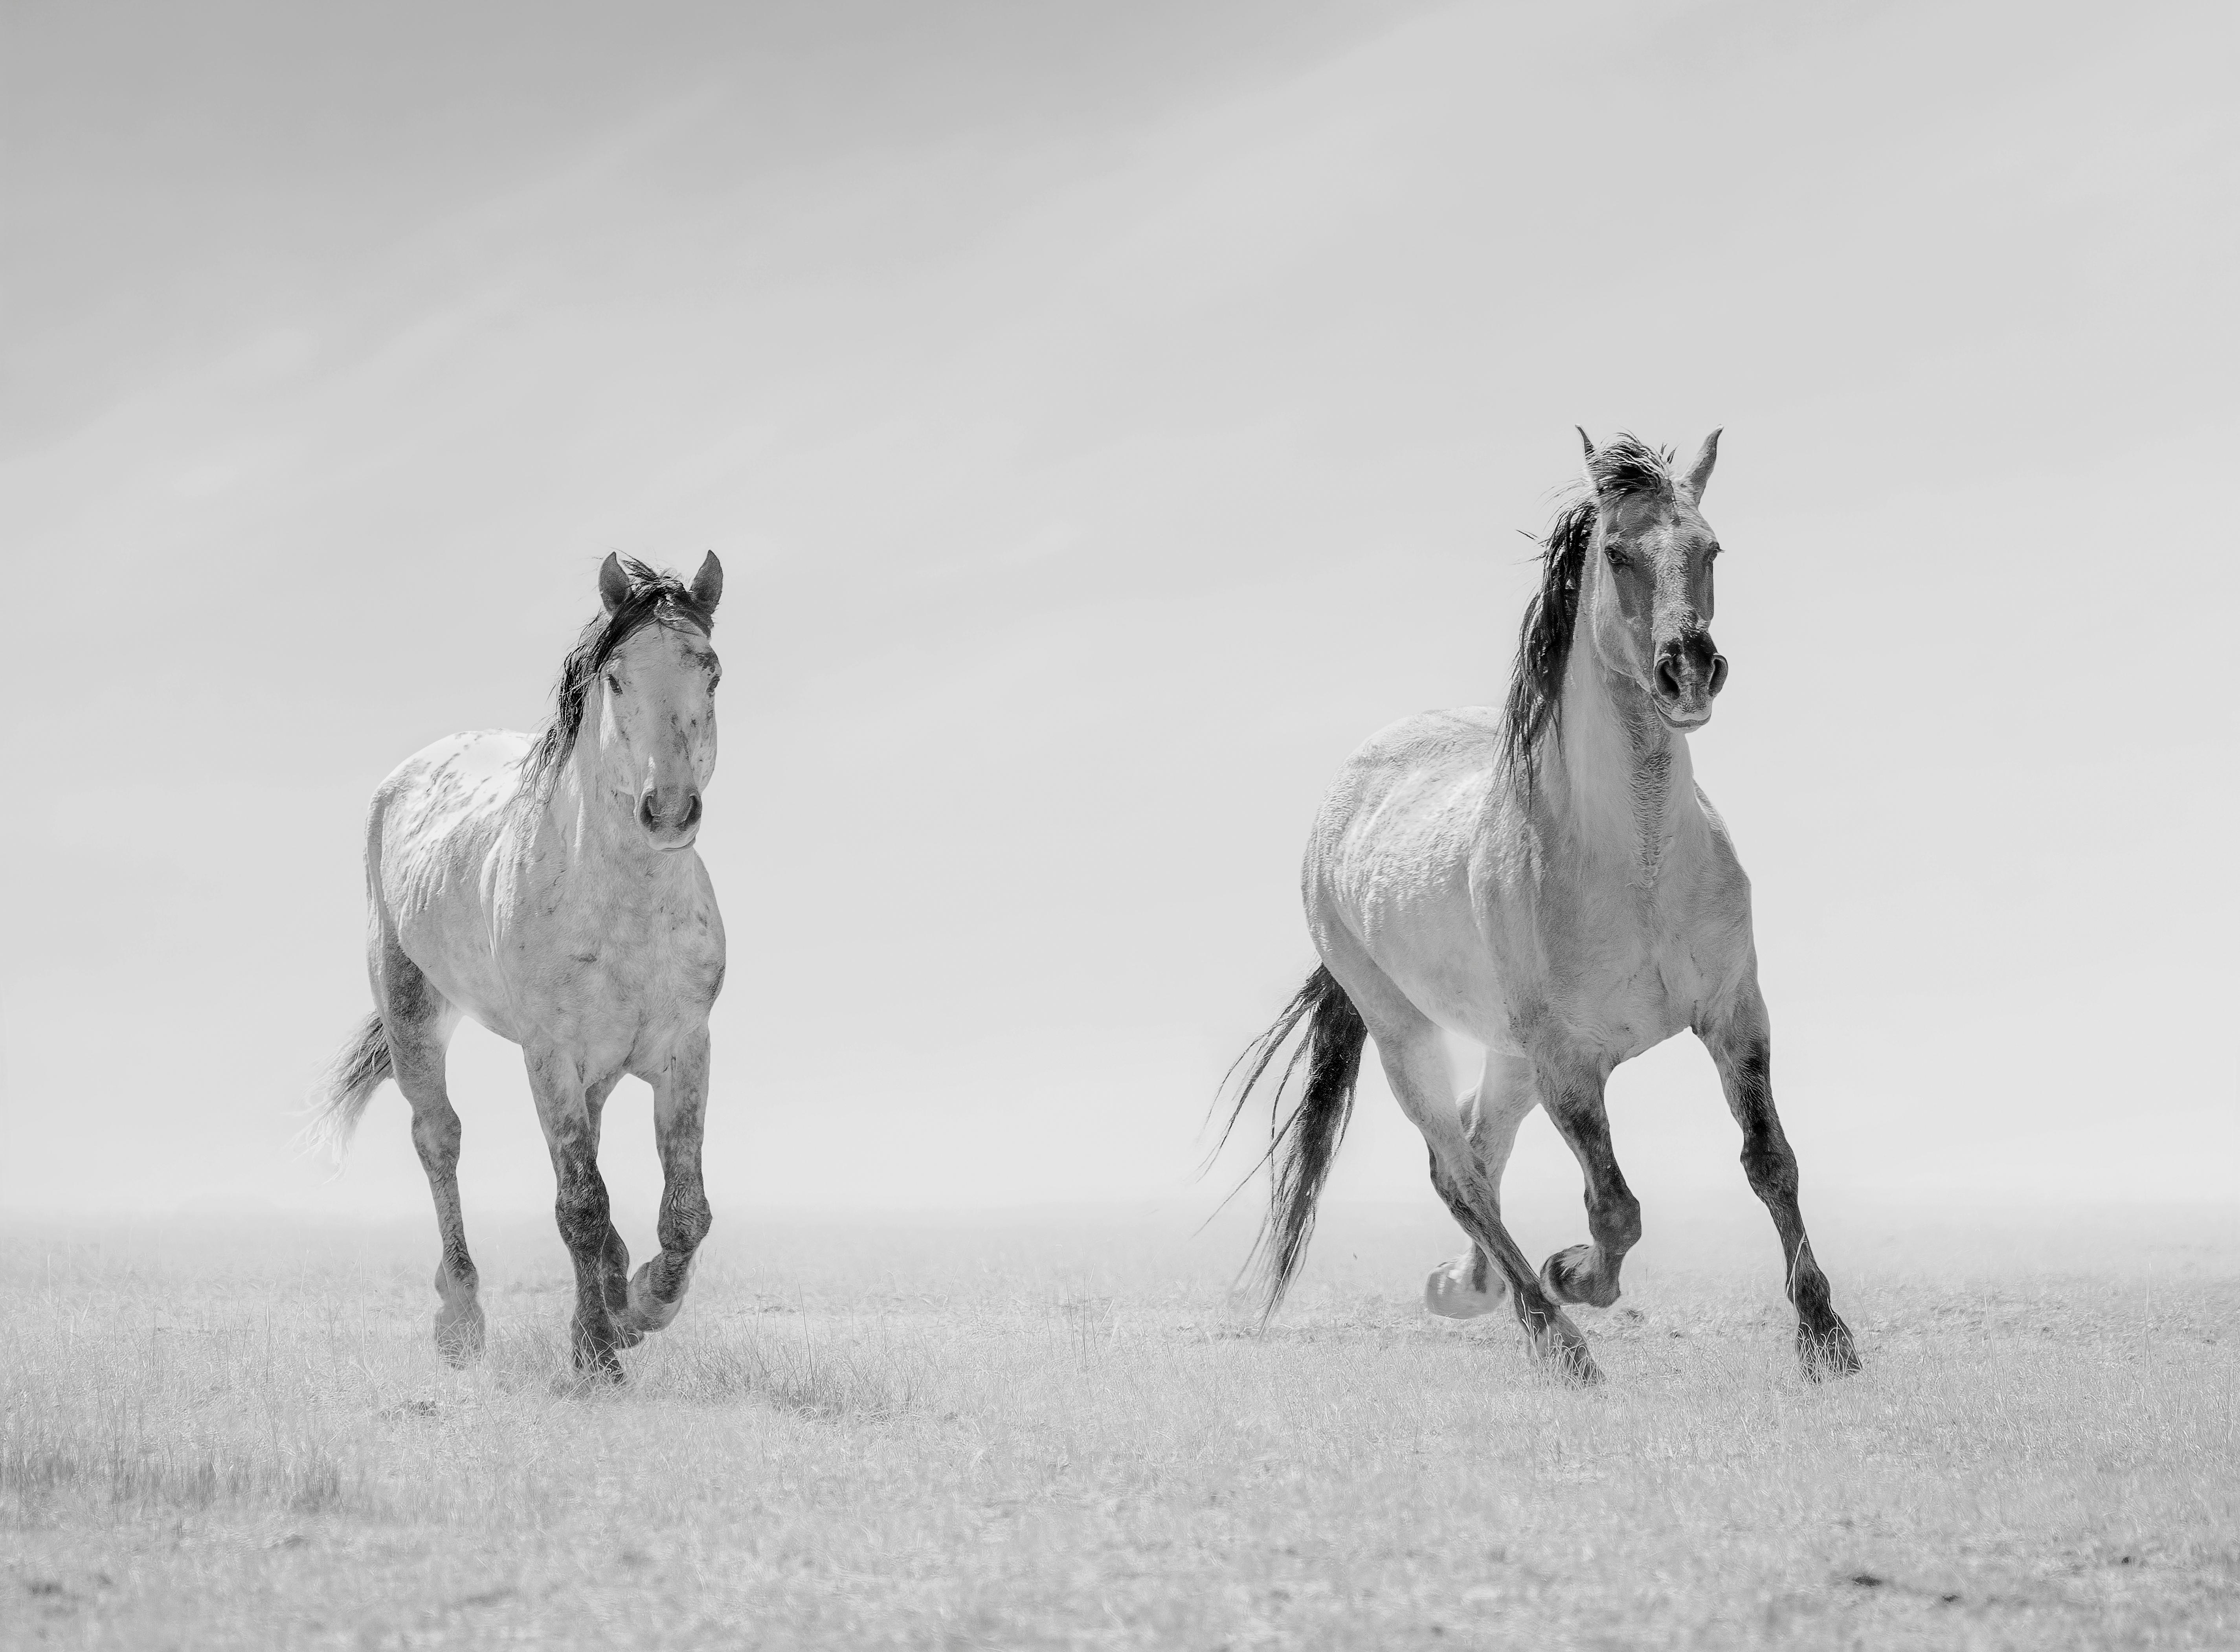 Shane Russeck Animal Print - "Heroes of the West " 36x48 - Black & White Photography, Wild Horses, Mustangs